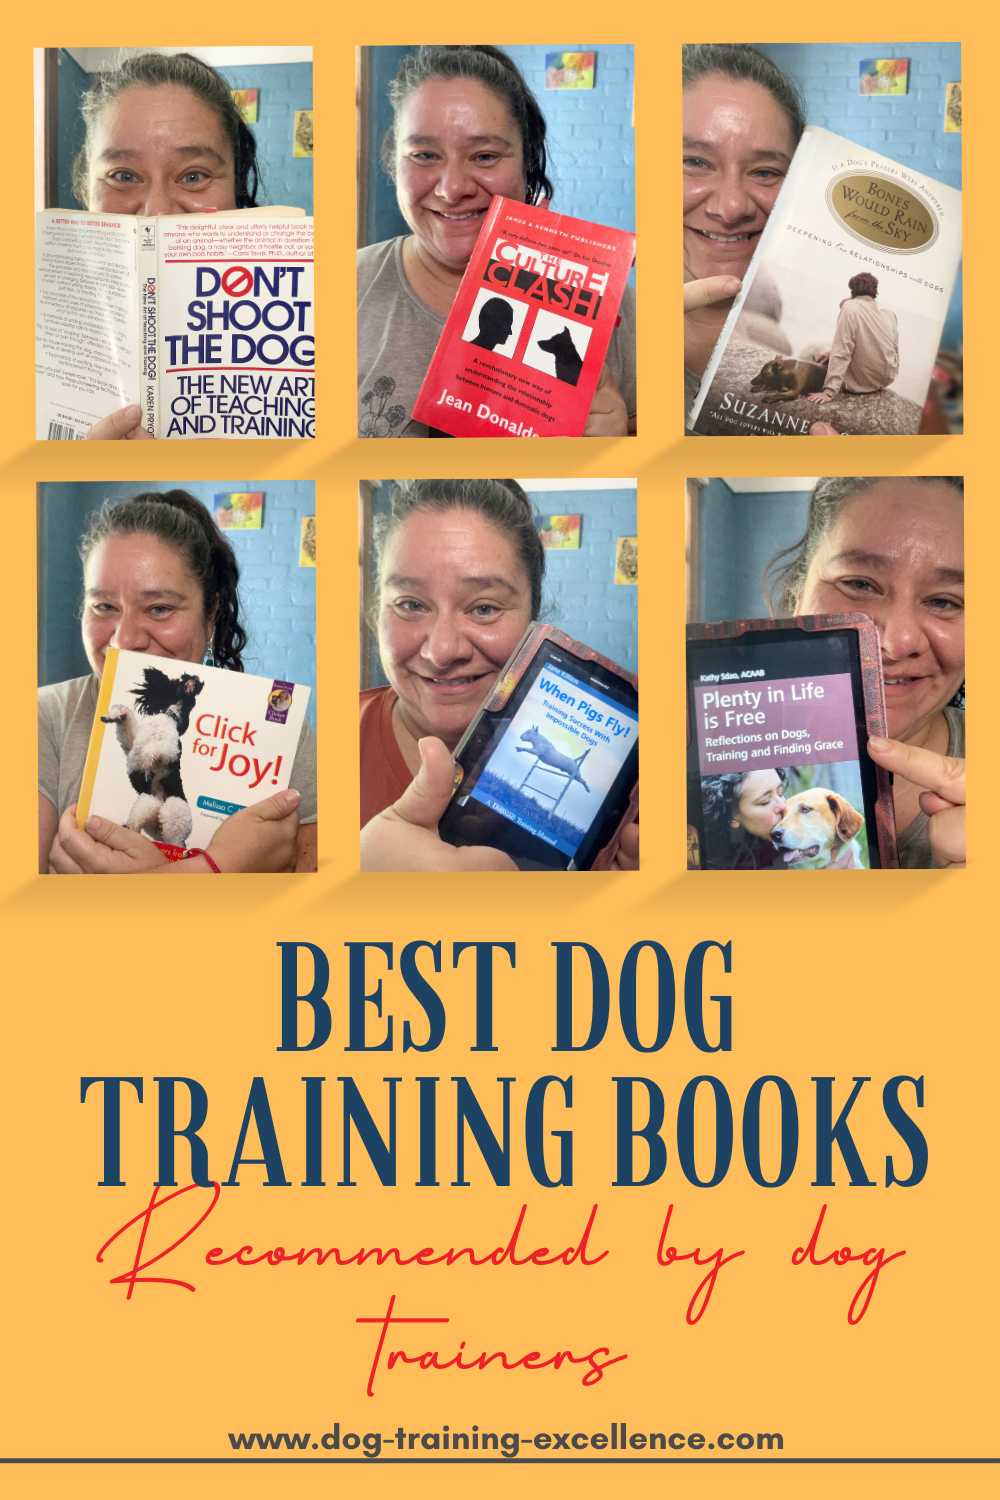 Best dog training books recommended by dog trainers